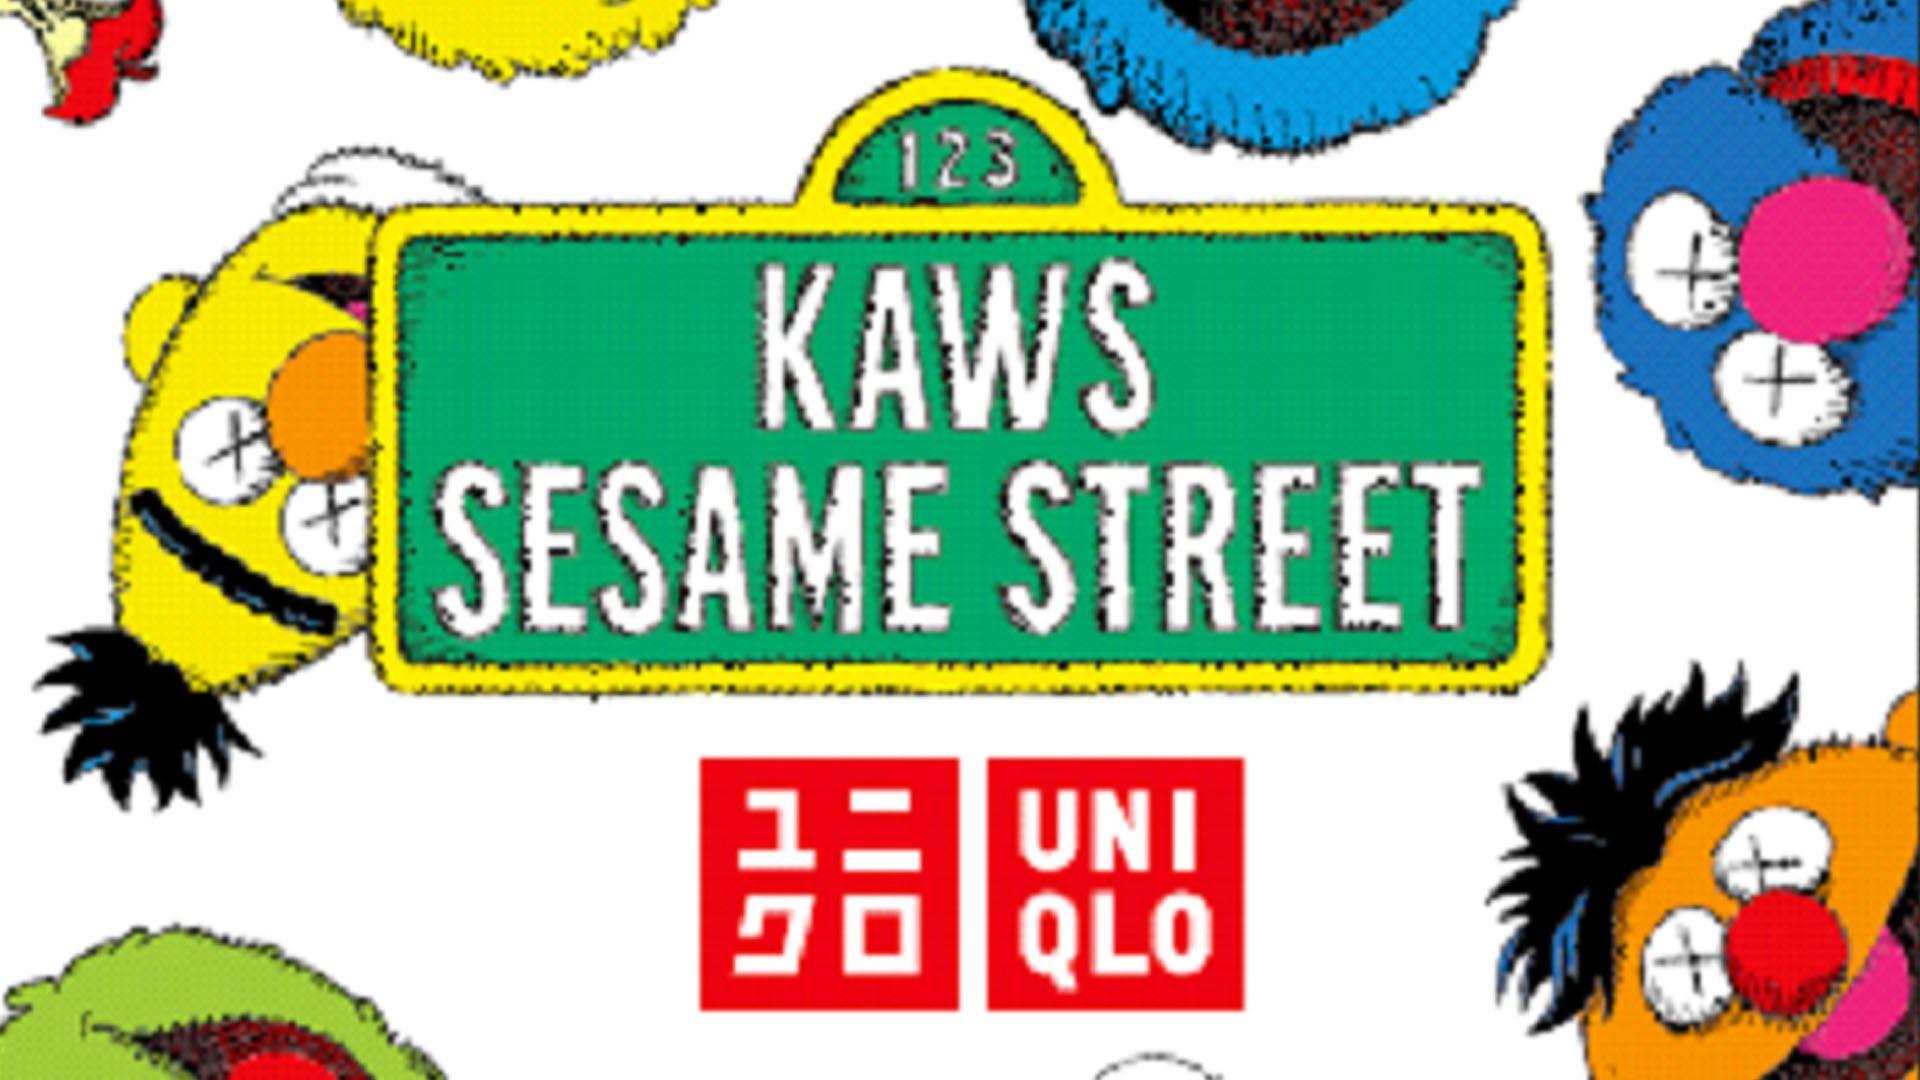 UNIQLO To Launch KAWS x SESAME STREET UT Collection